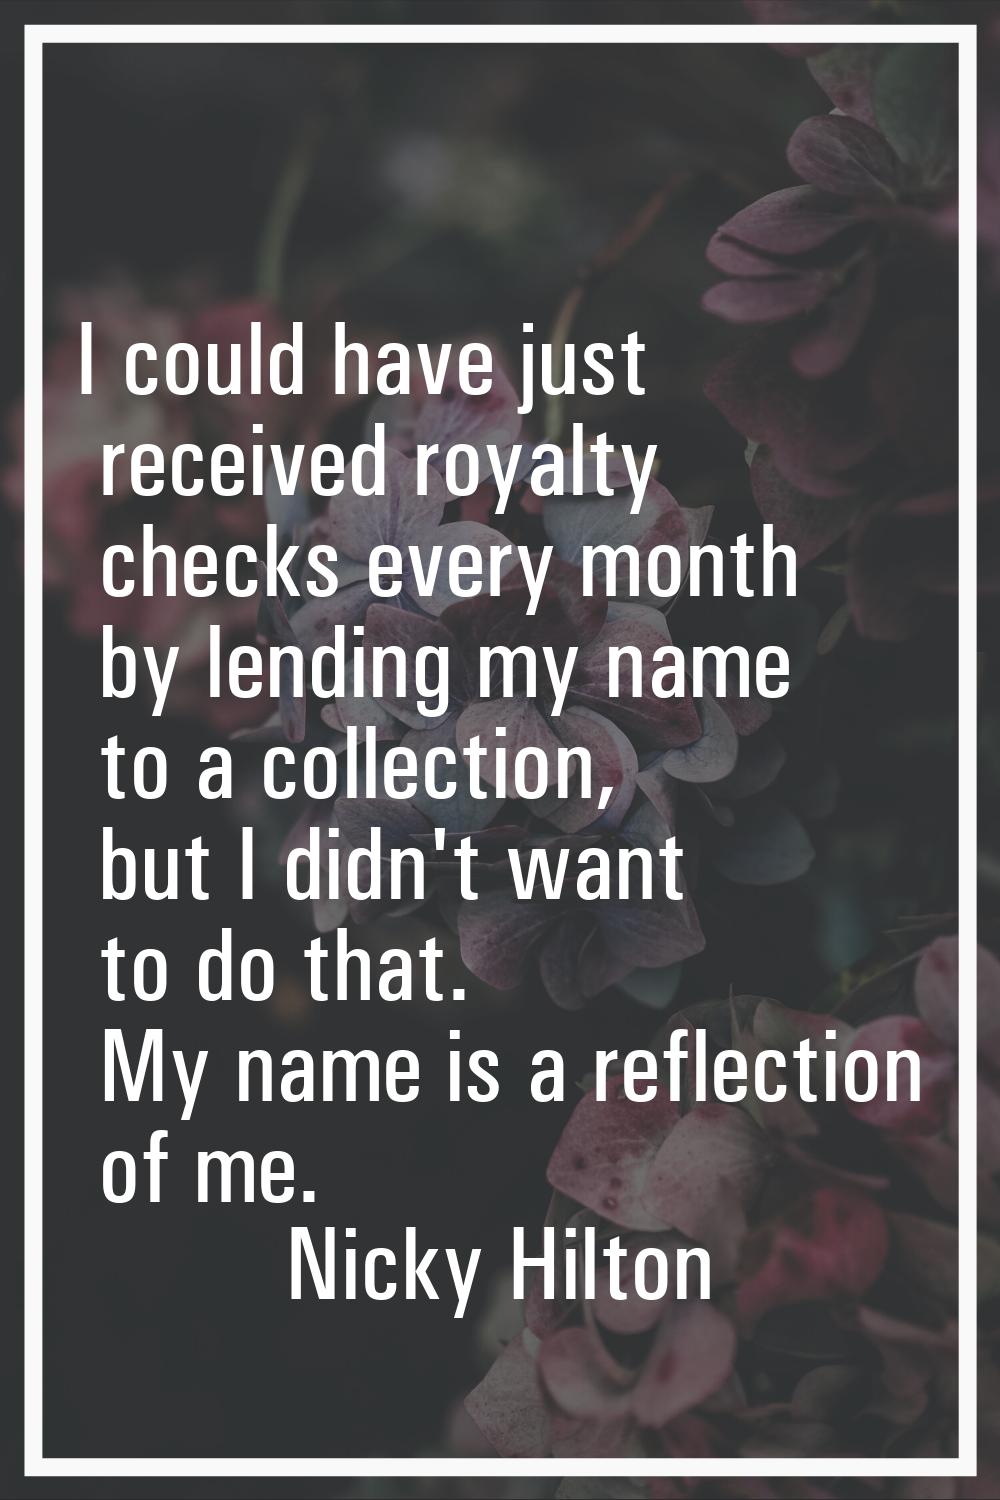 I could have just received royalty checks every month by lending my name to a collection, but I did